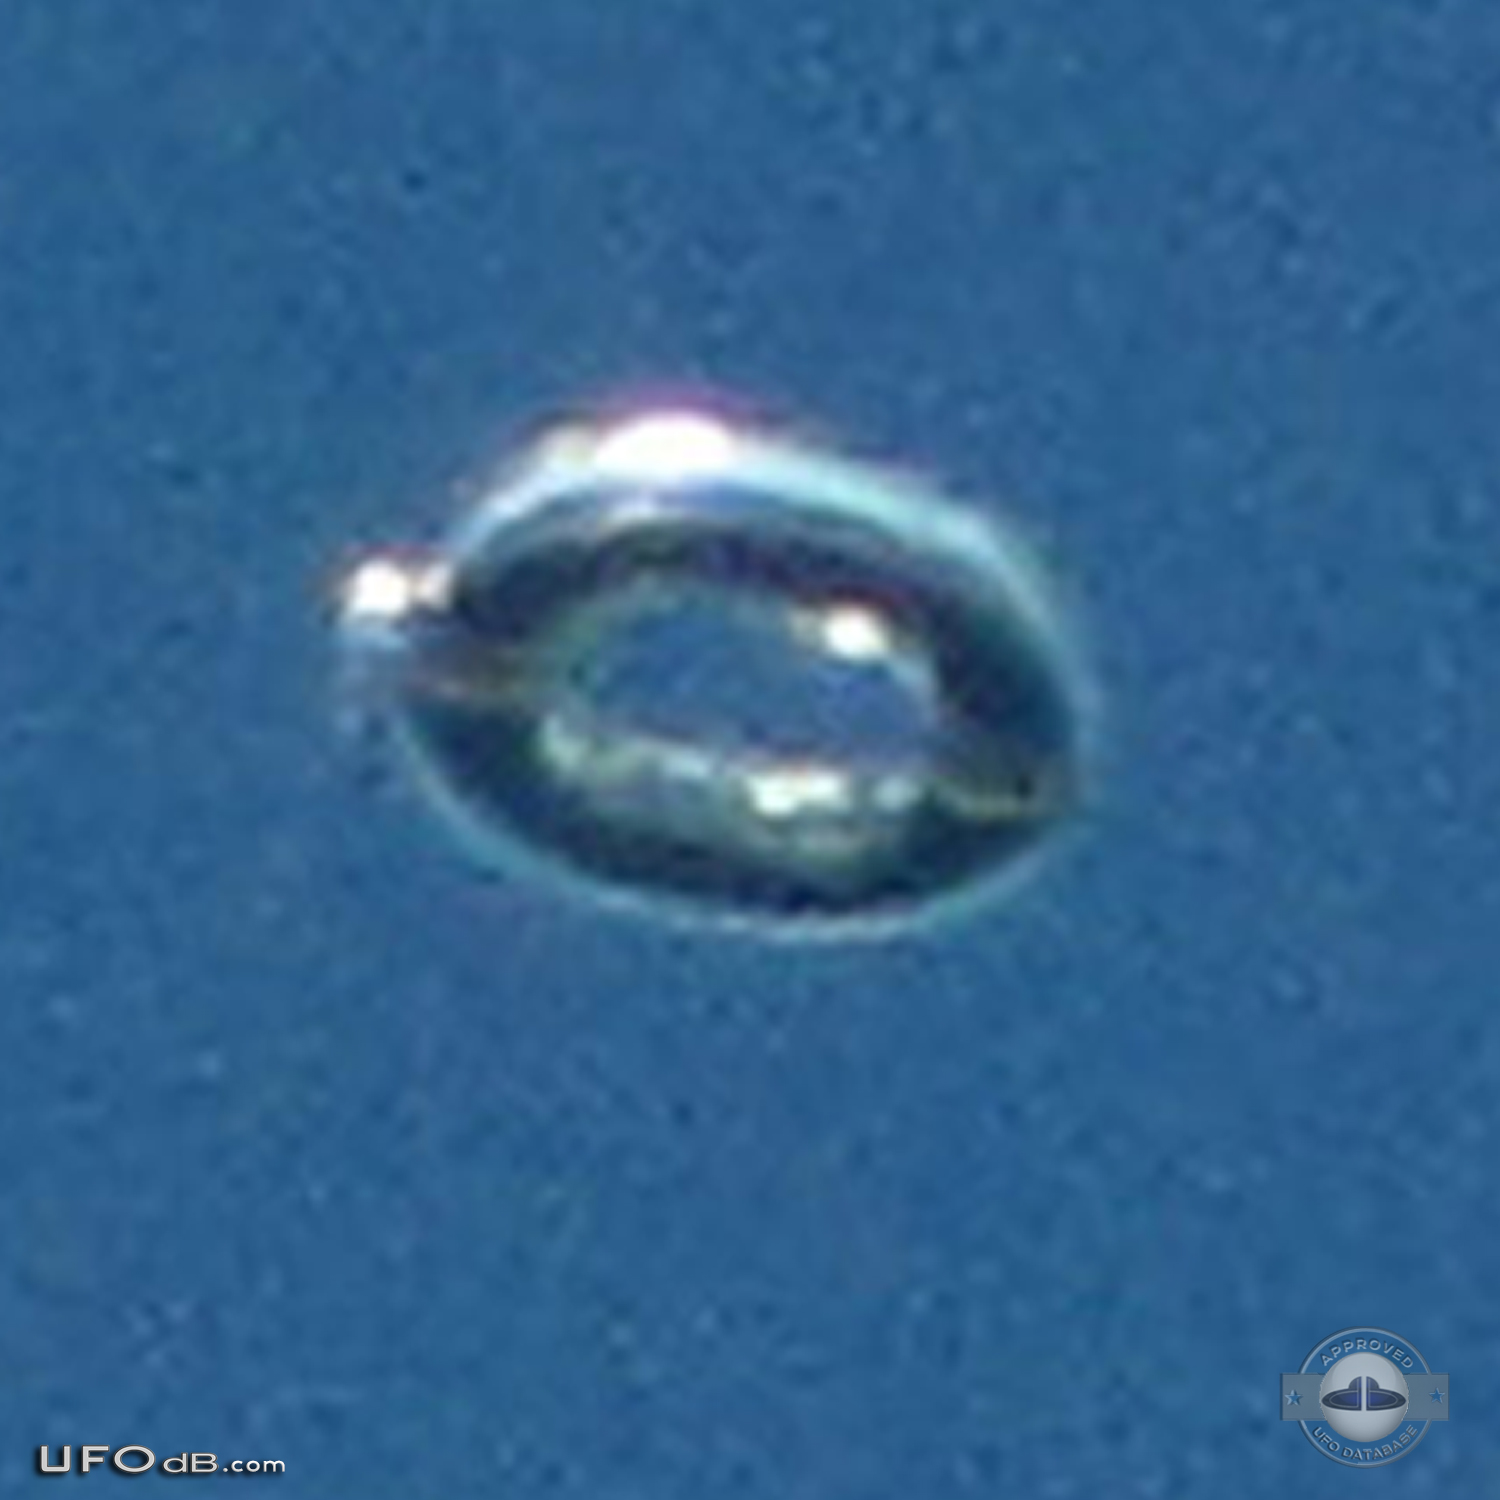 Donut shaped UFO with glowing silver material over Scituate Ma US 2012 UFO Picture #481-3